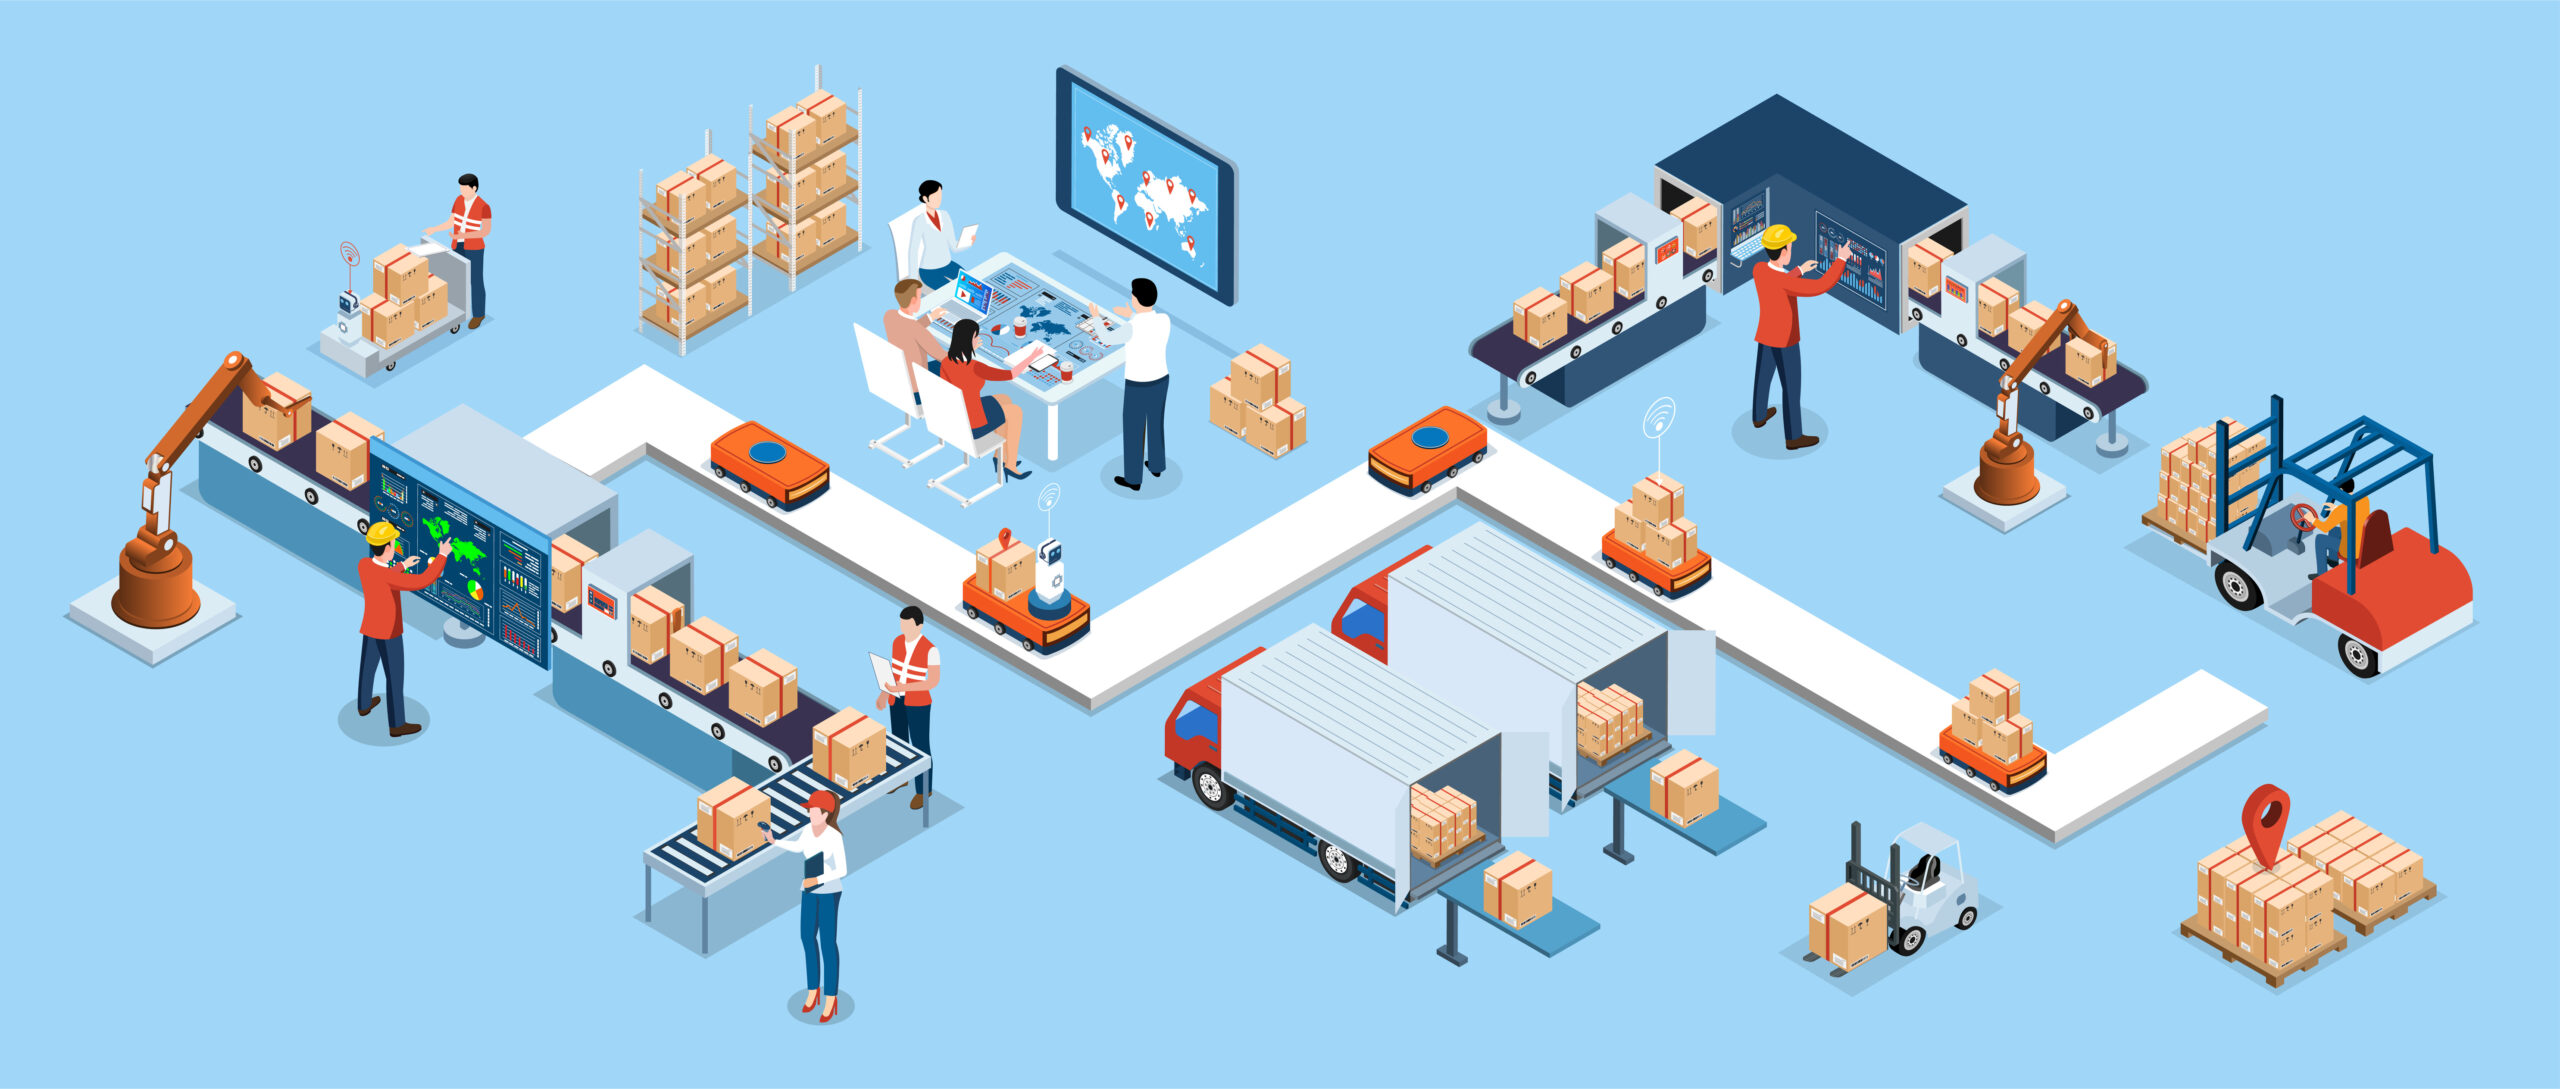 3d Isometric Automated Warehouse Robots And Smart Warehouse Technology Concept With Warehouse Automation System And Autonomous Robot Transportation Operation Service. Vector Illustration Eps 10